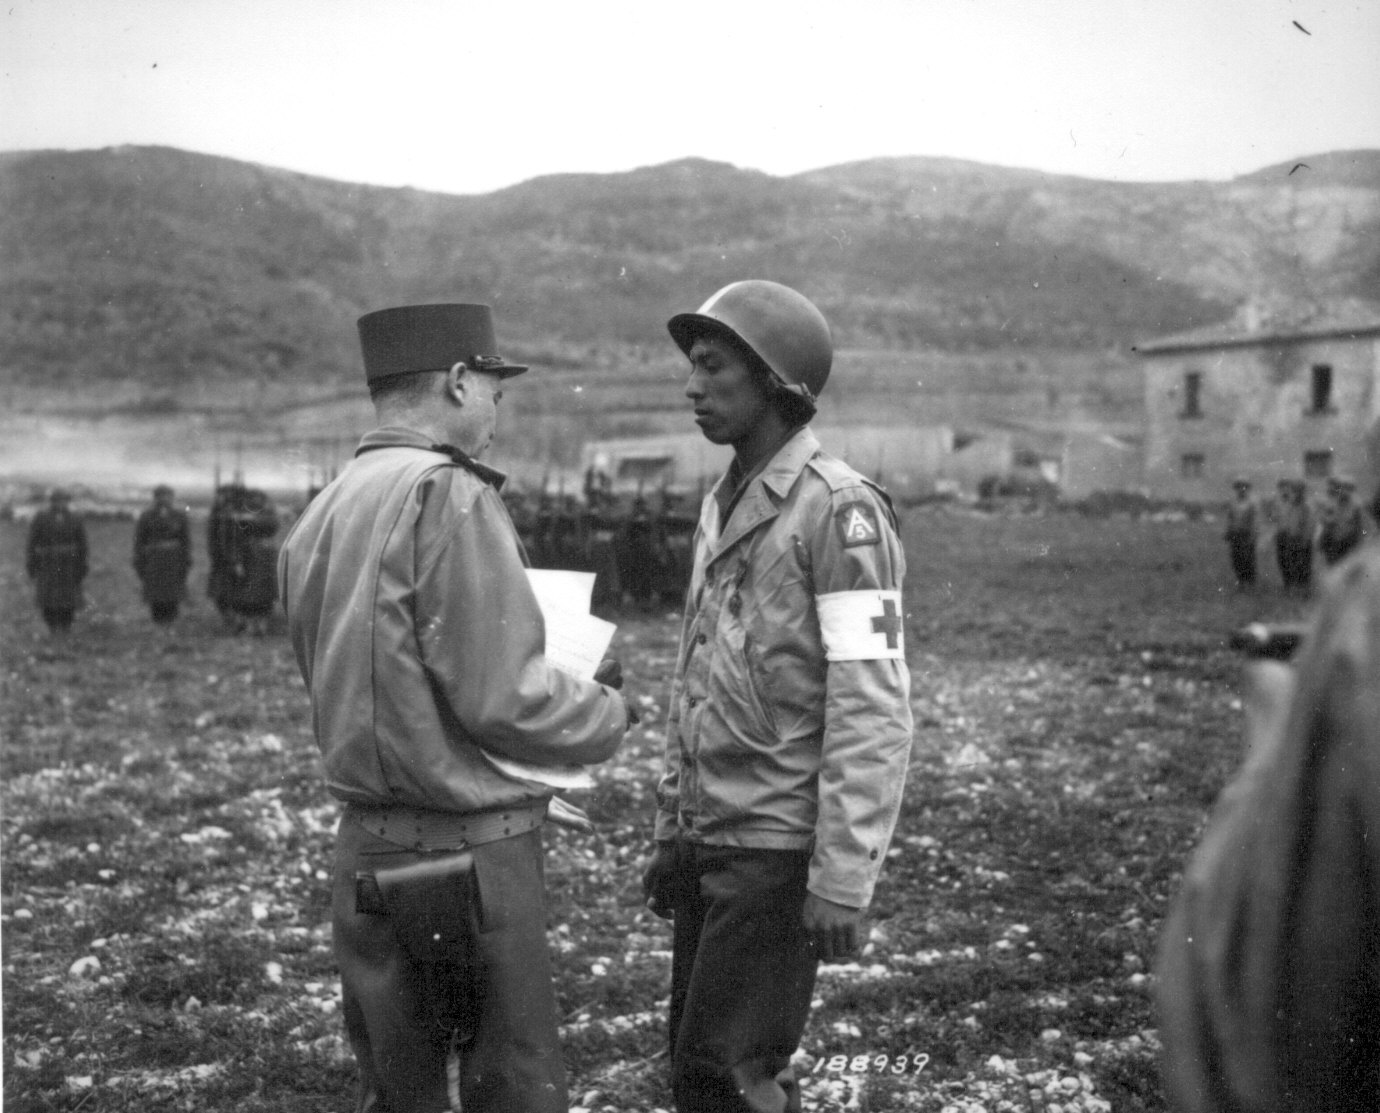 US Army Private Jonathan Hoag, a medic, was awarded a Croix de Guerre by French General Alphonse Juin for courage shown in treating the wounded, Pozzuoli, Italy, 21 Mar 1944